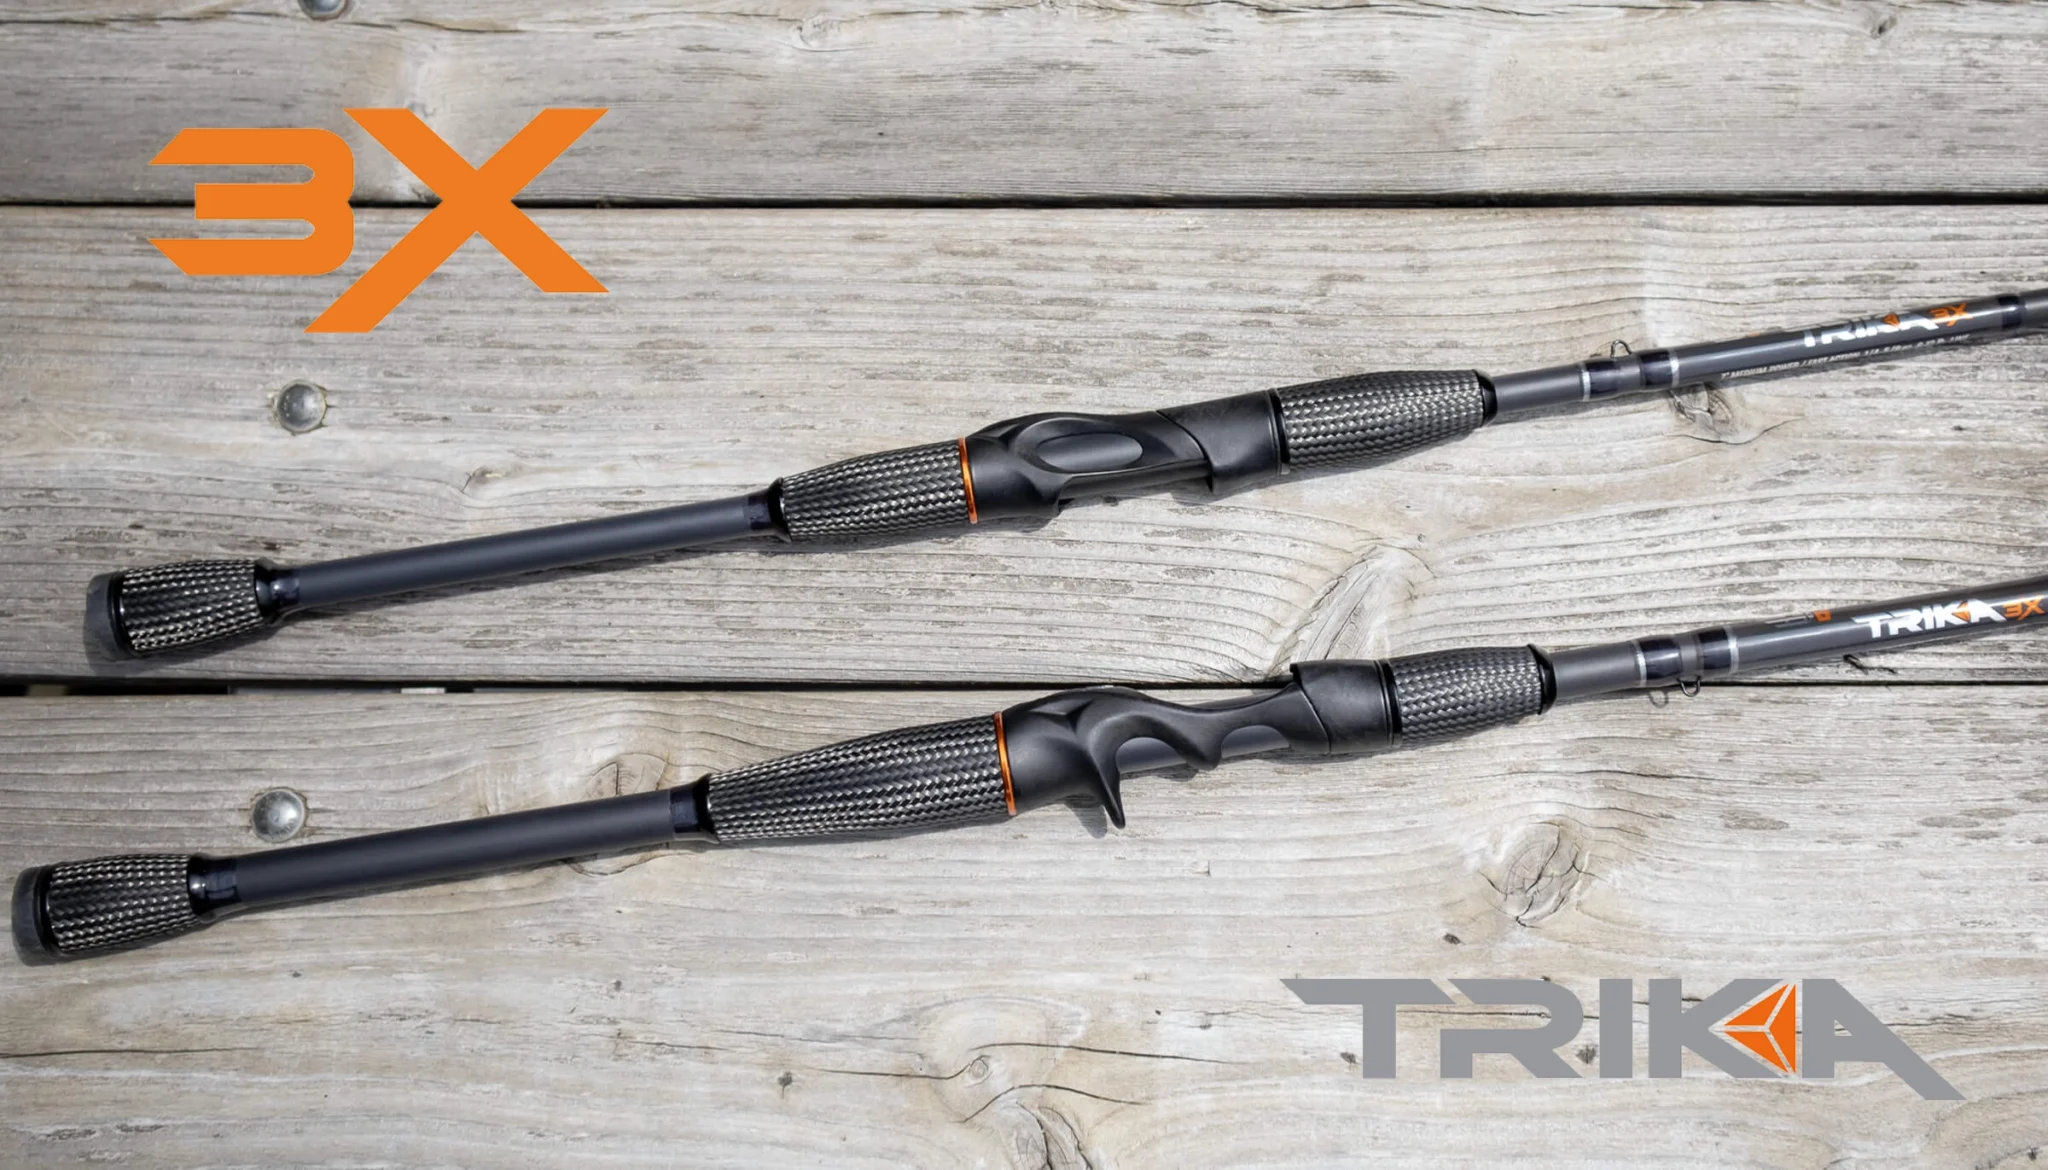 Trika 3x Series Pick of the Litter Rod Giveaway Winners - Wired2Fish